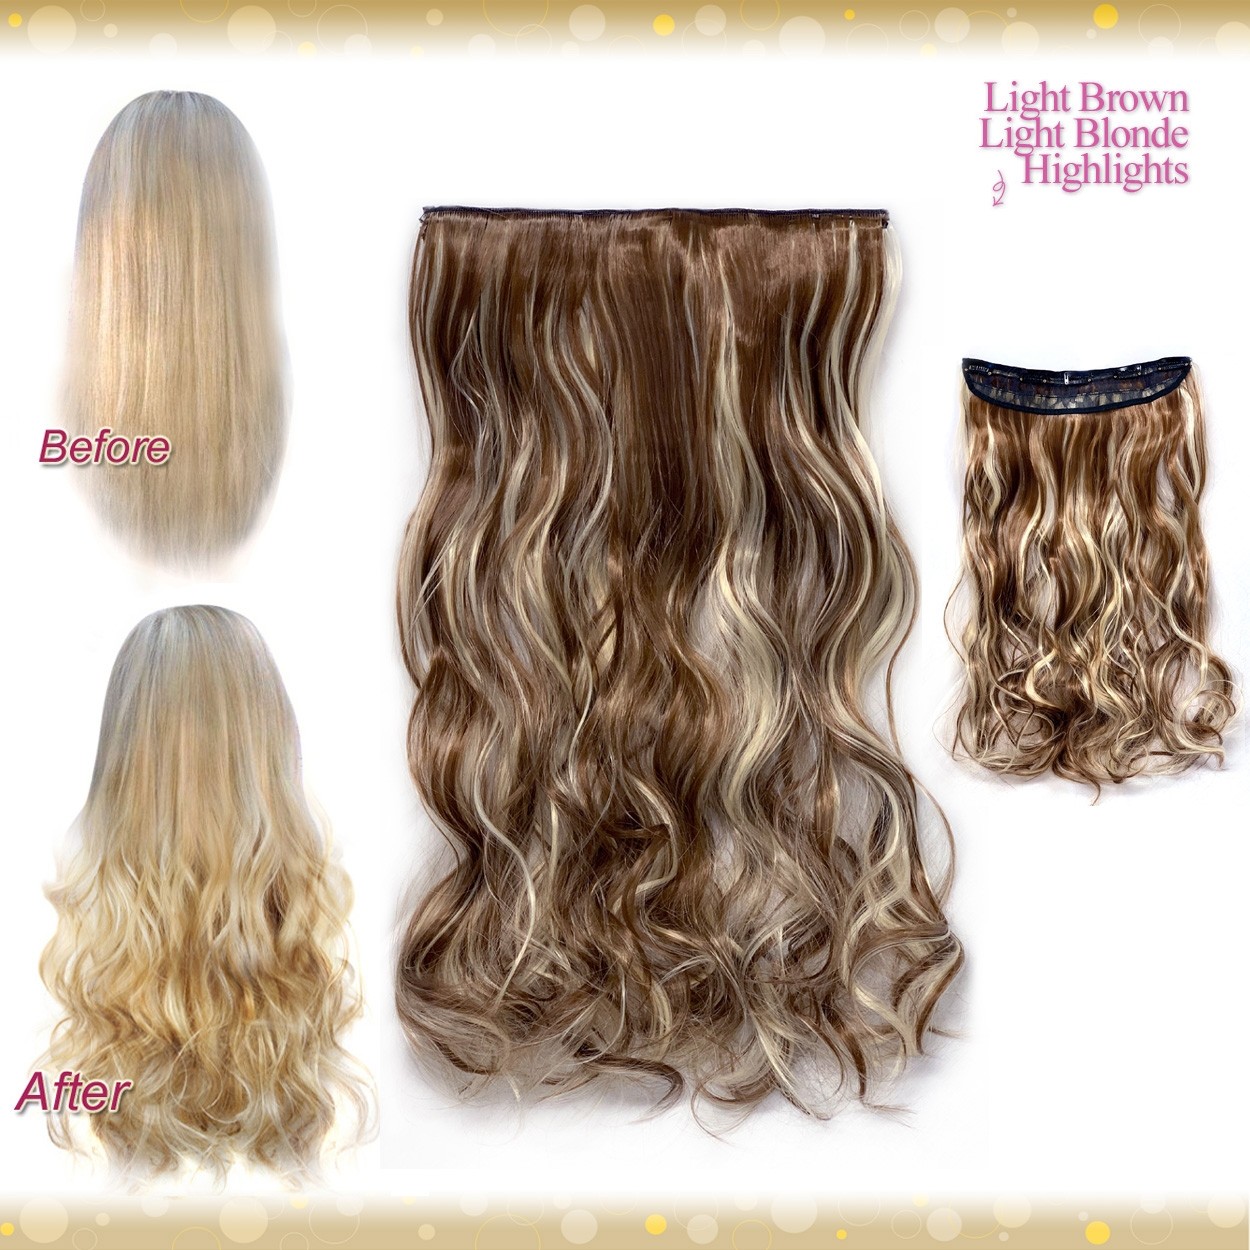 Wiwigs - Half head 1 Piece clip In Curly Light Brown Light Blonde Highlights  Hair Extensions UK